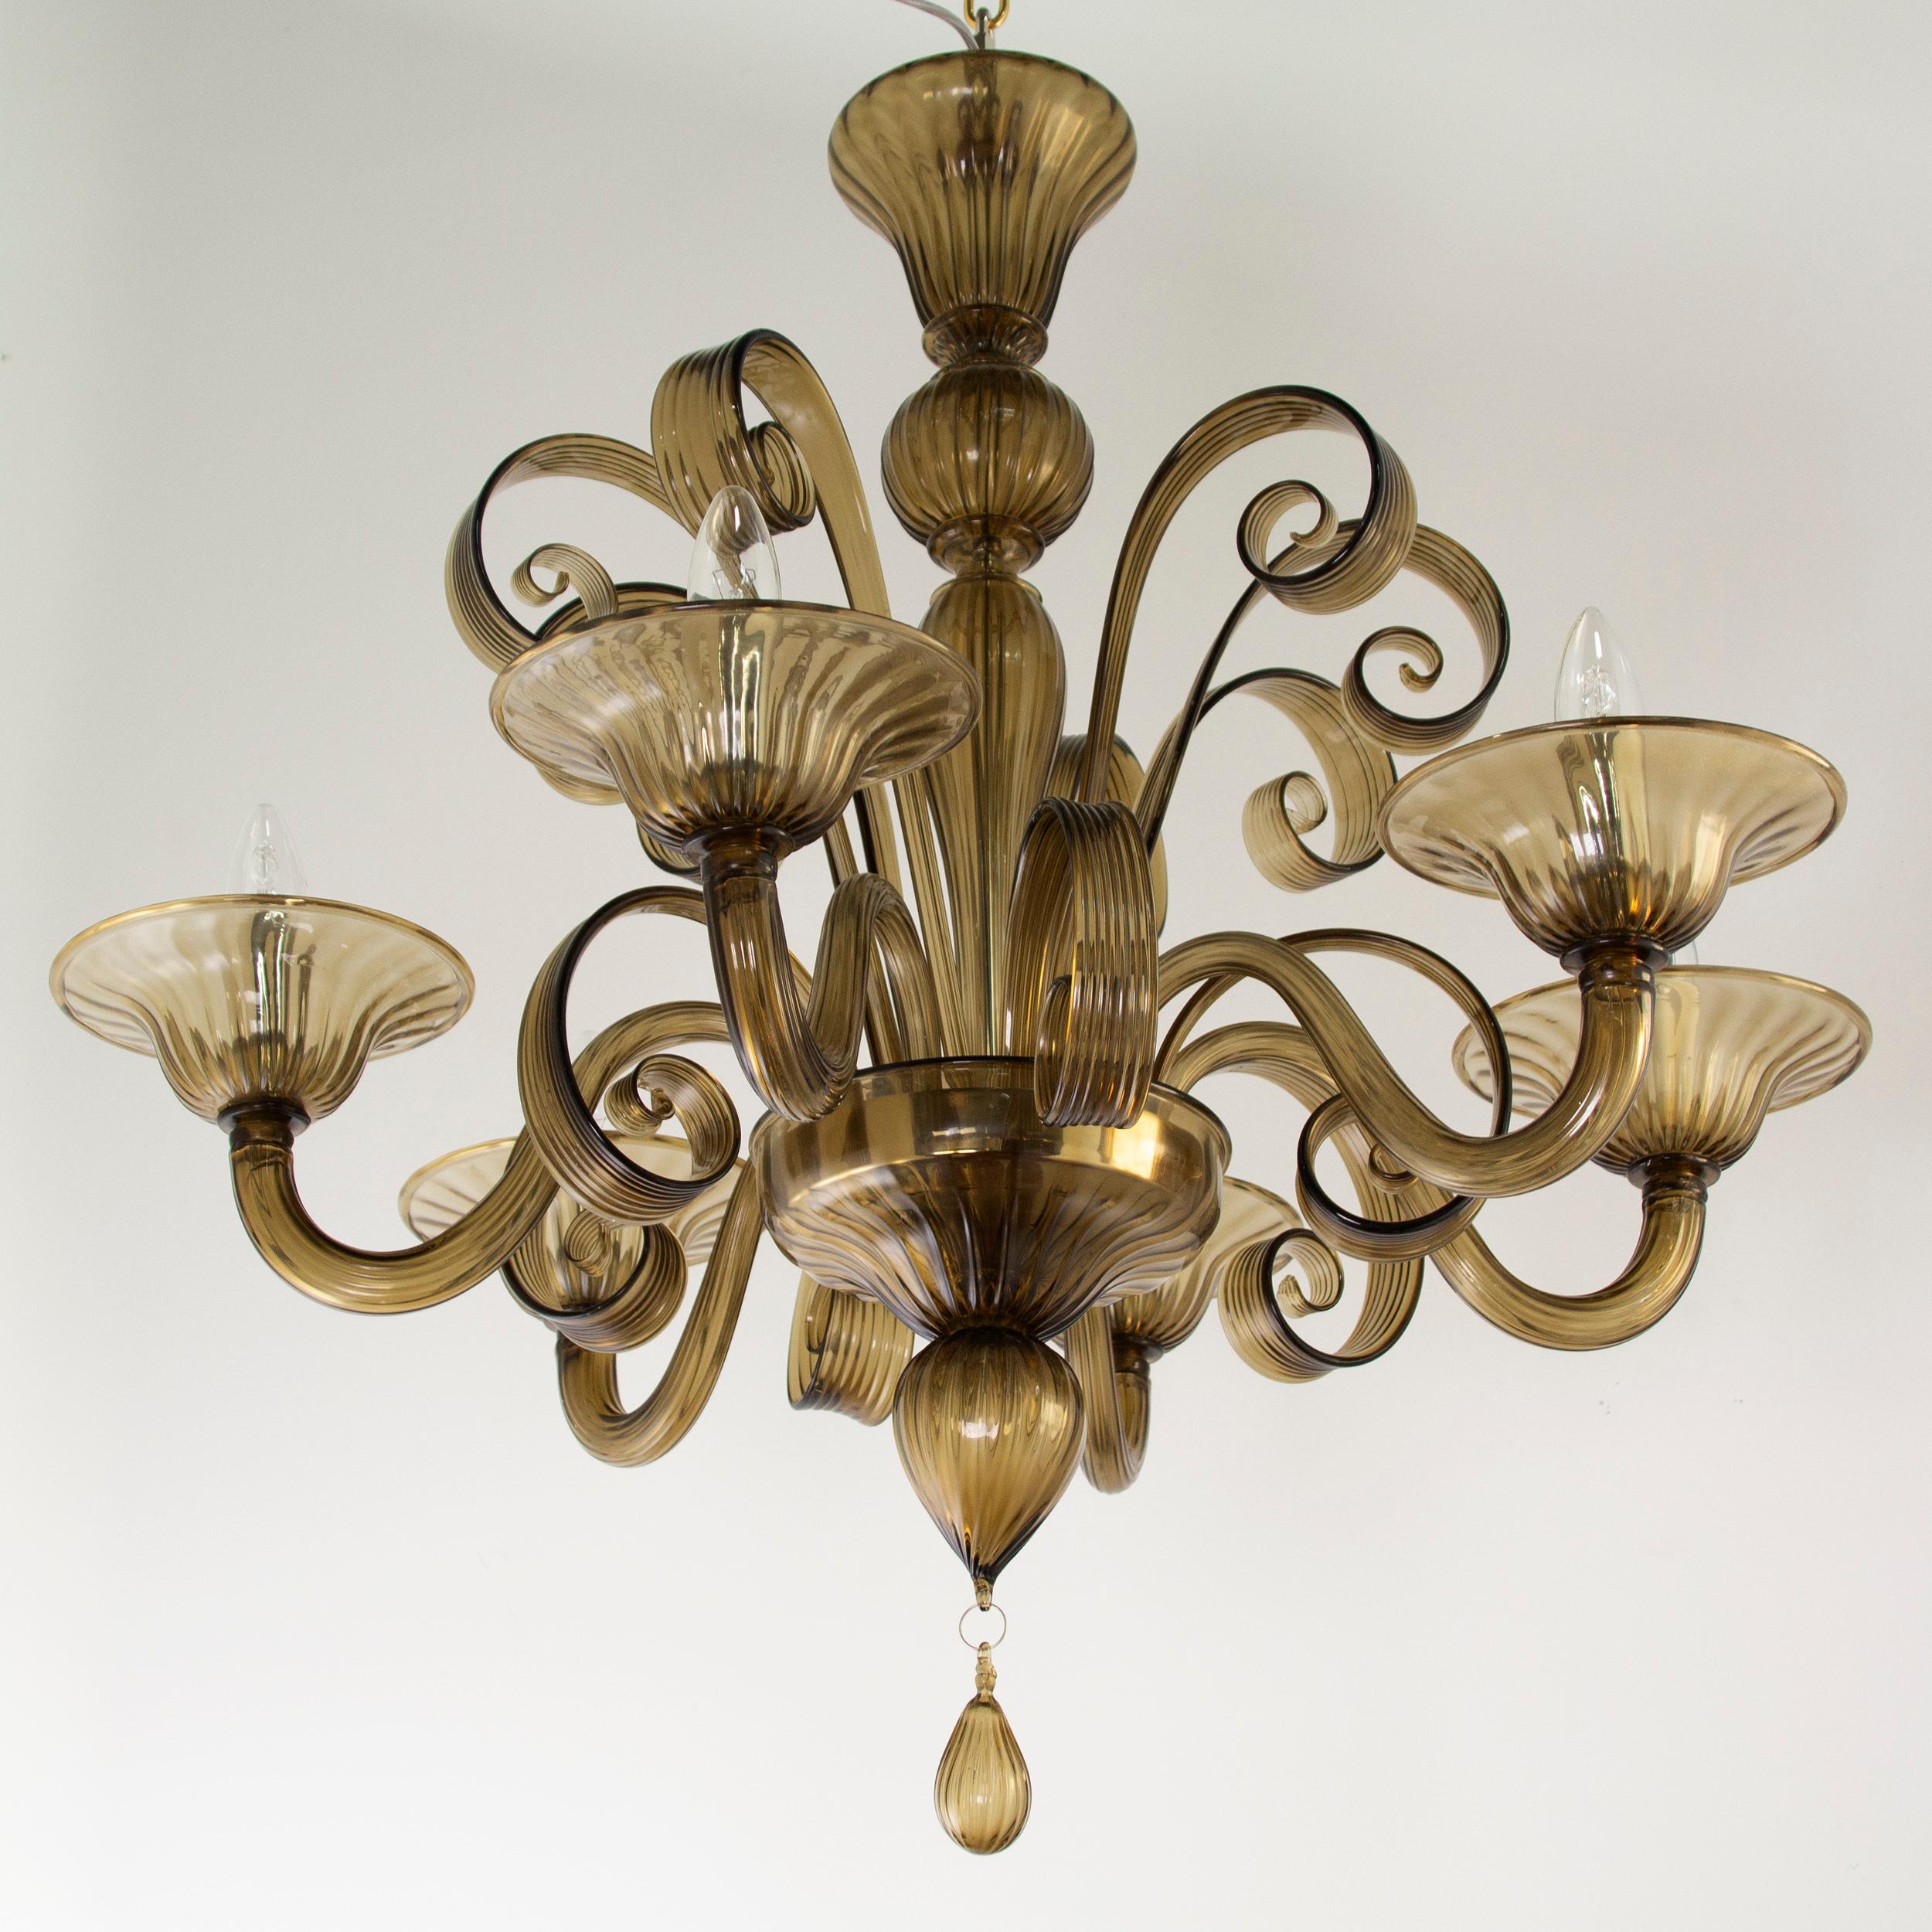 Capriccio by Multiforme is a 6 lights chandelier, in moka artistic glass, with curly ornamental elements.
Inspired by the Classic Venetian tradition it is characterized by a central column where many blown glass “pastoral” elements are installed.